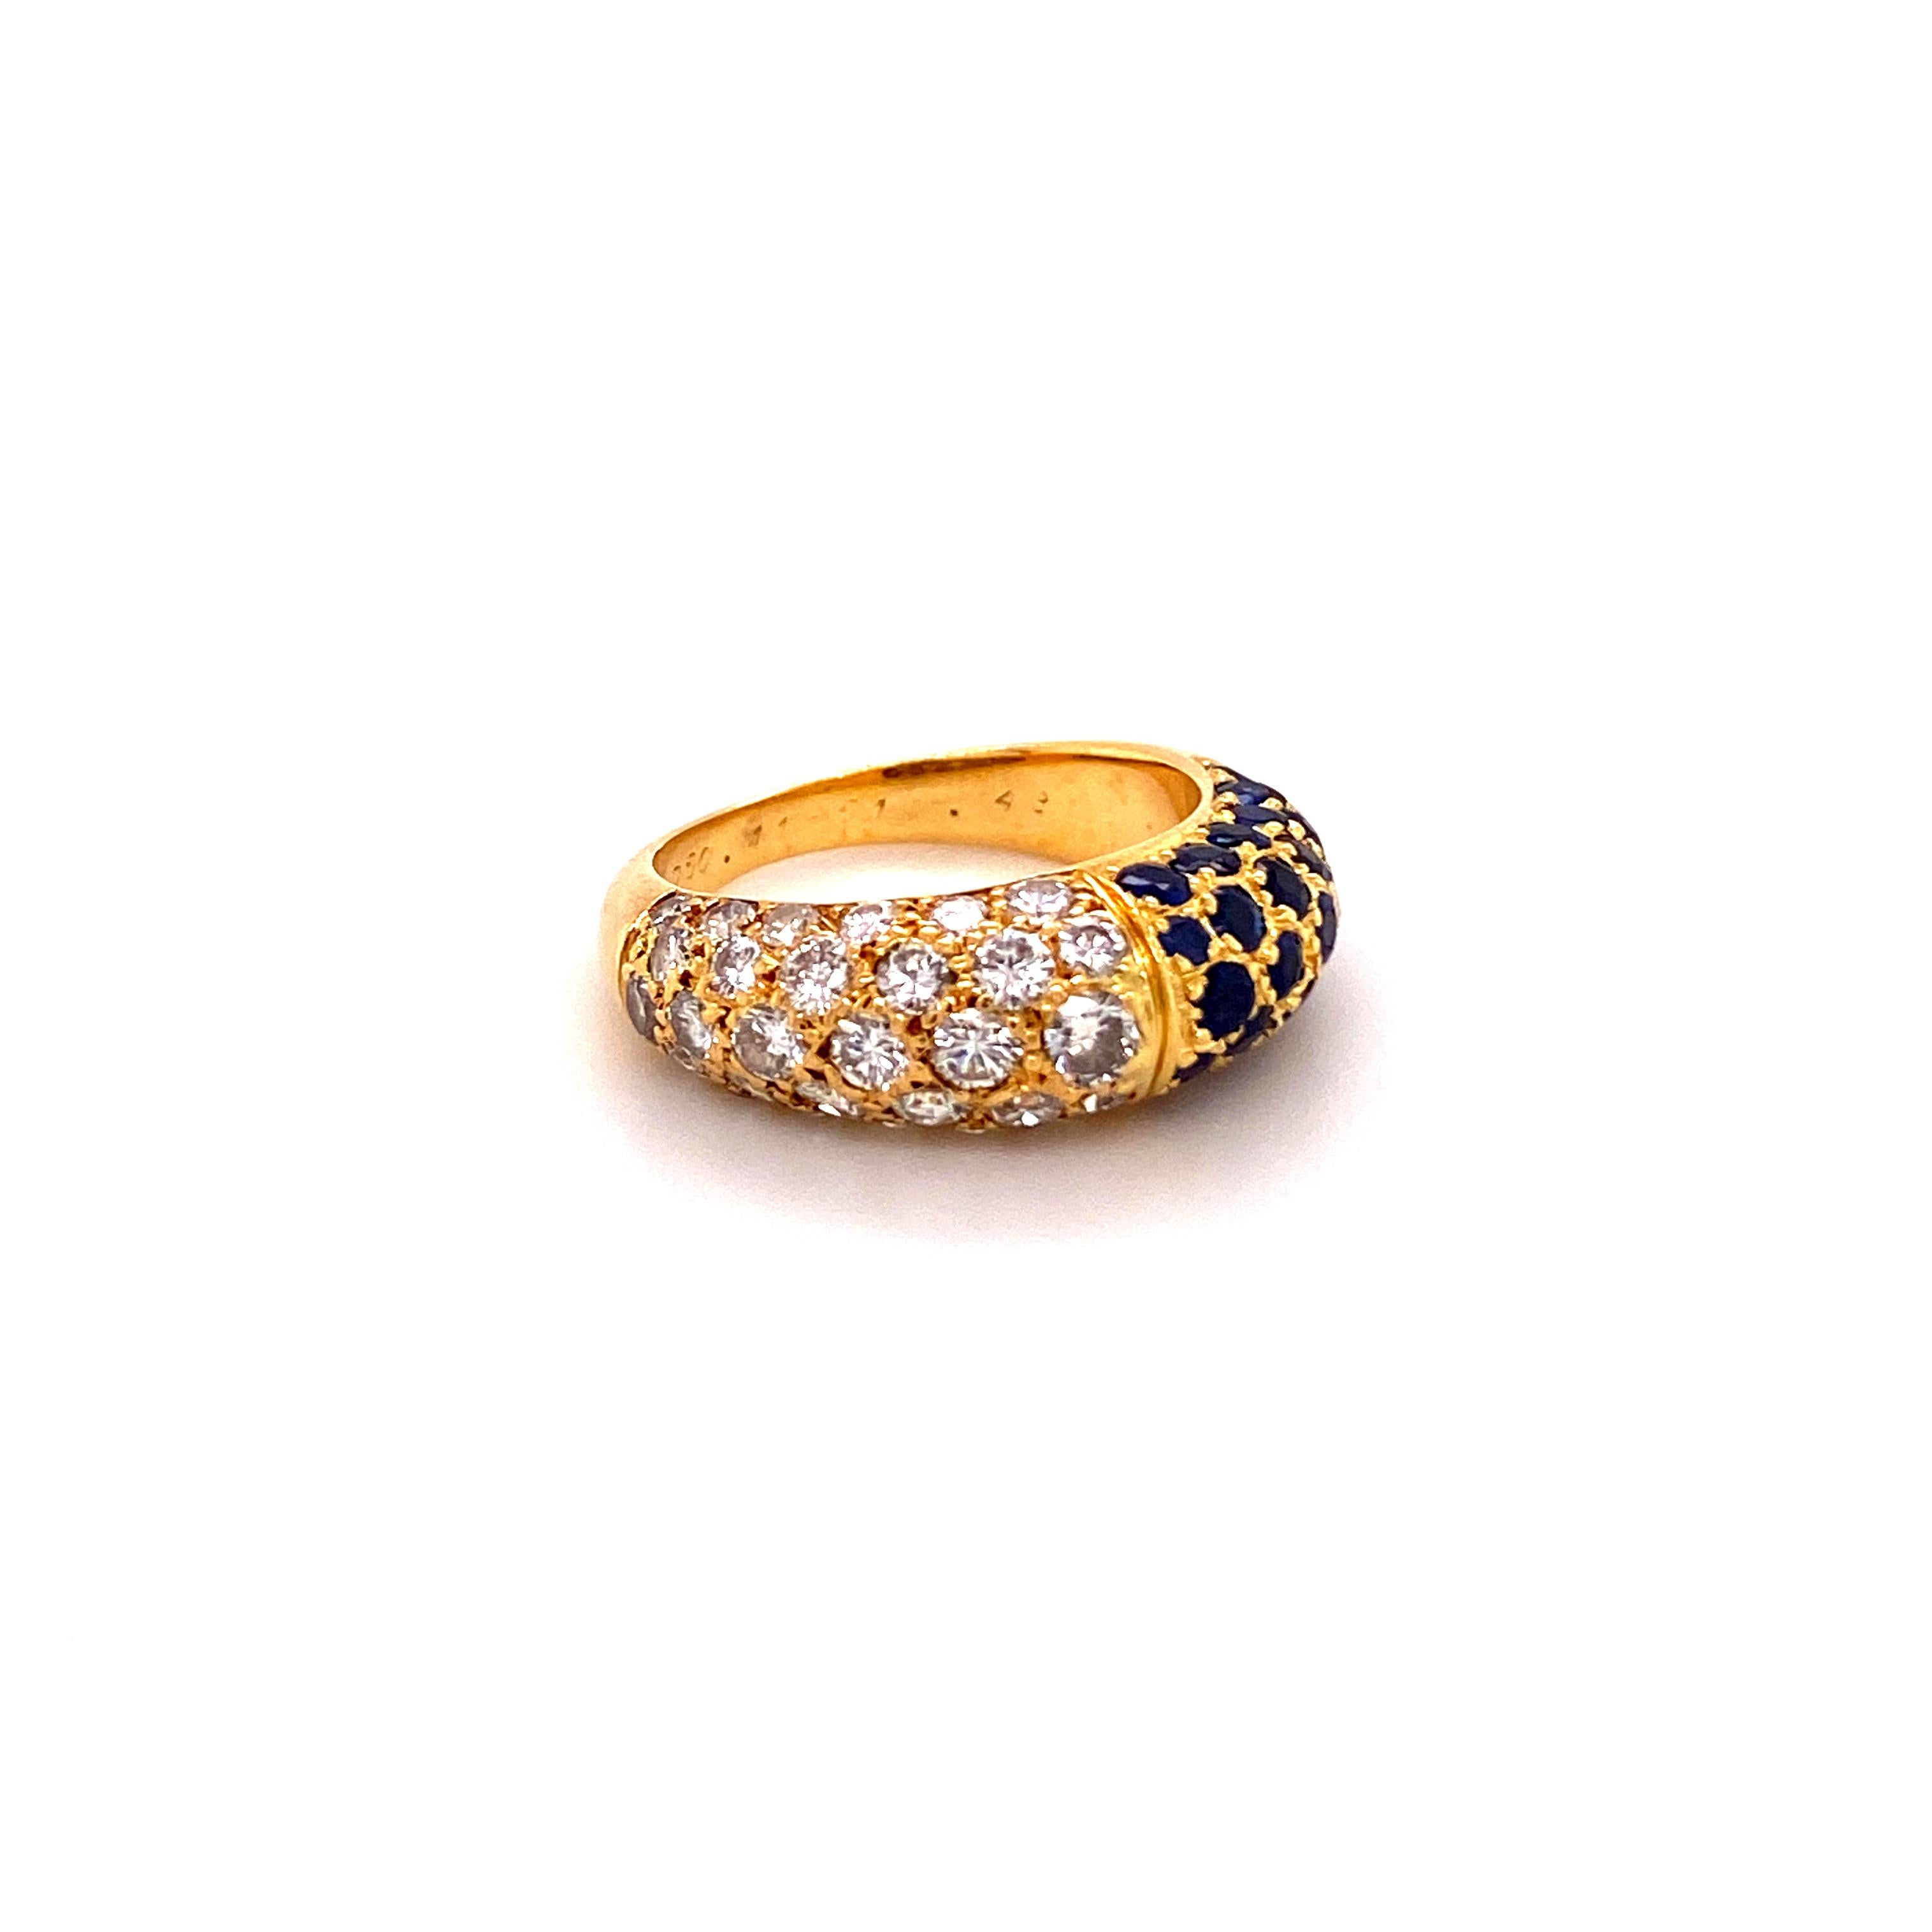 This ring by Cartier is carefully crafted in 18 karat yellow gold. Set with 30 brilliant cut sapphires of approximately 0.80 carats and 30 brilliant-cut diamonds of F/G color and vs clarity, total weight approximately 0.80 carats.

Signed and